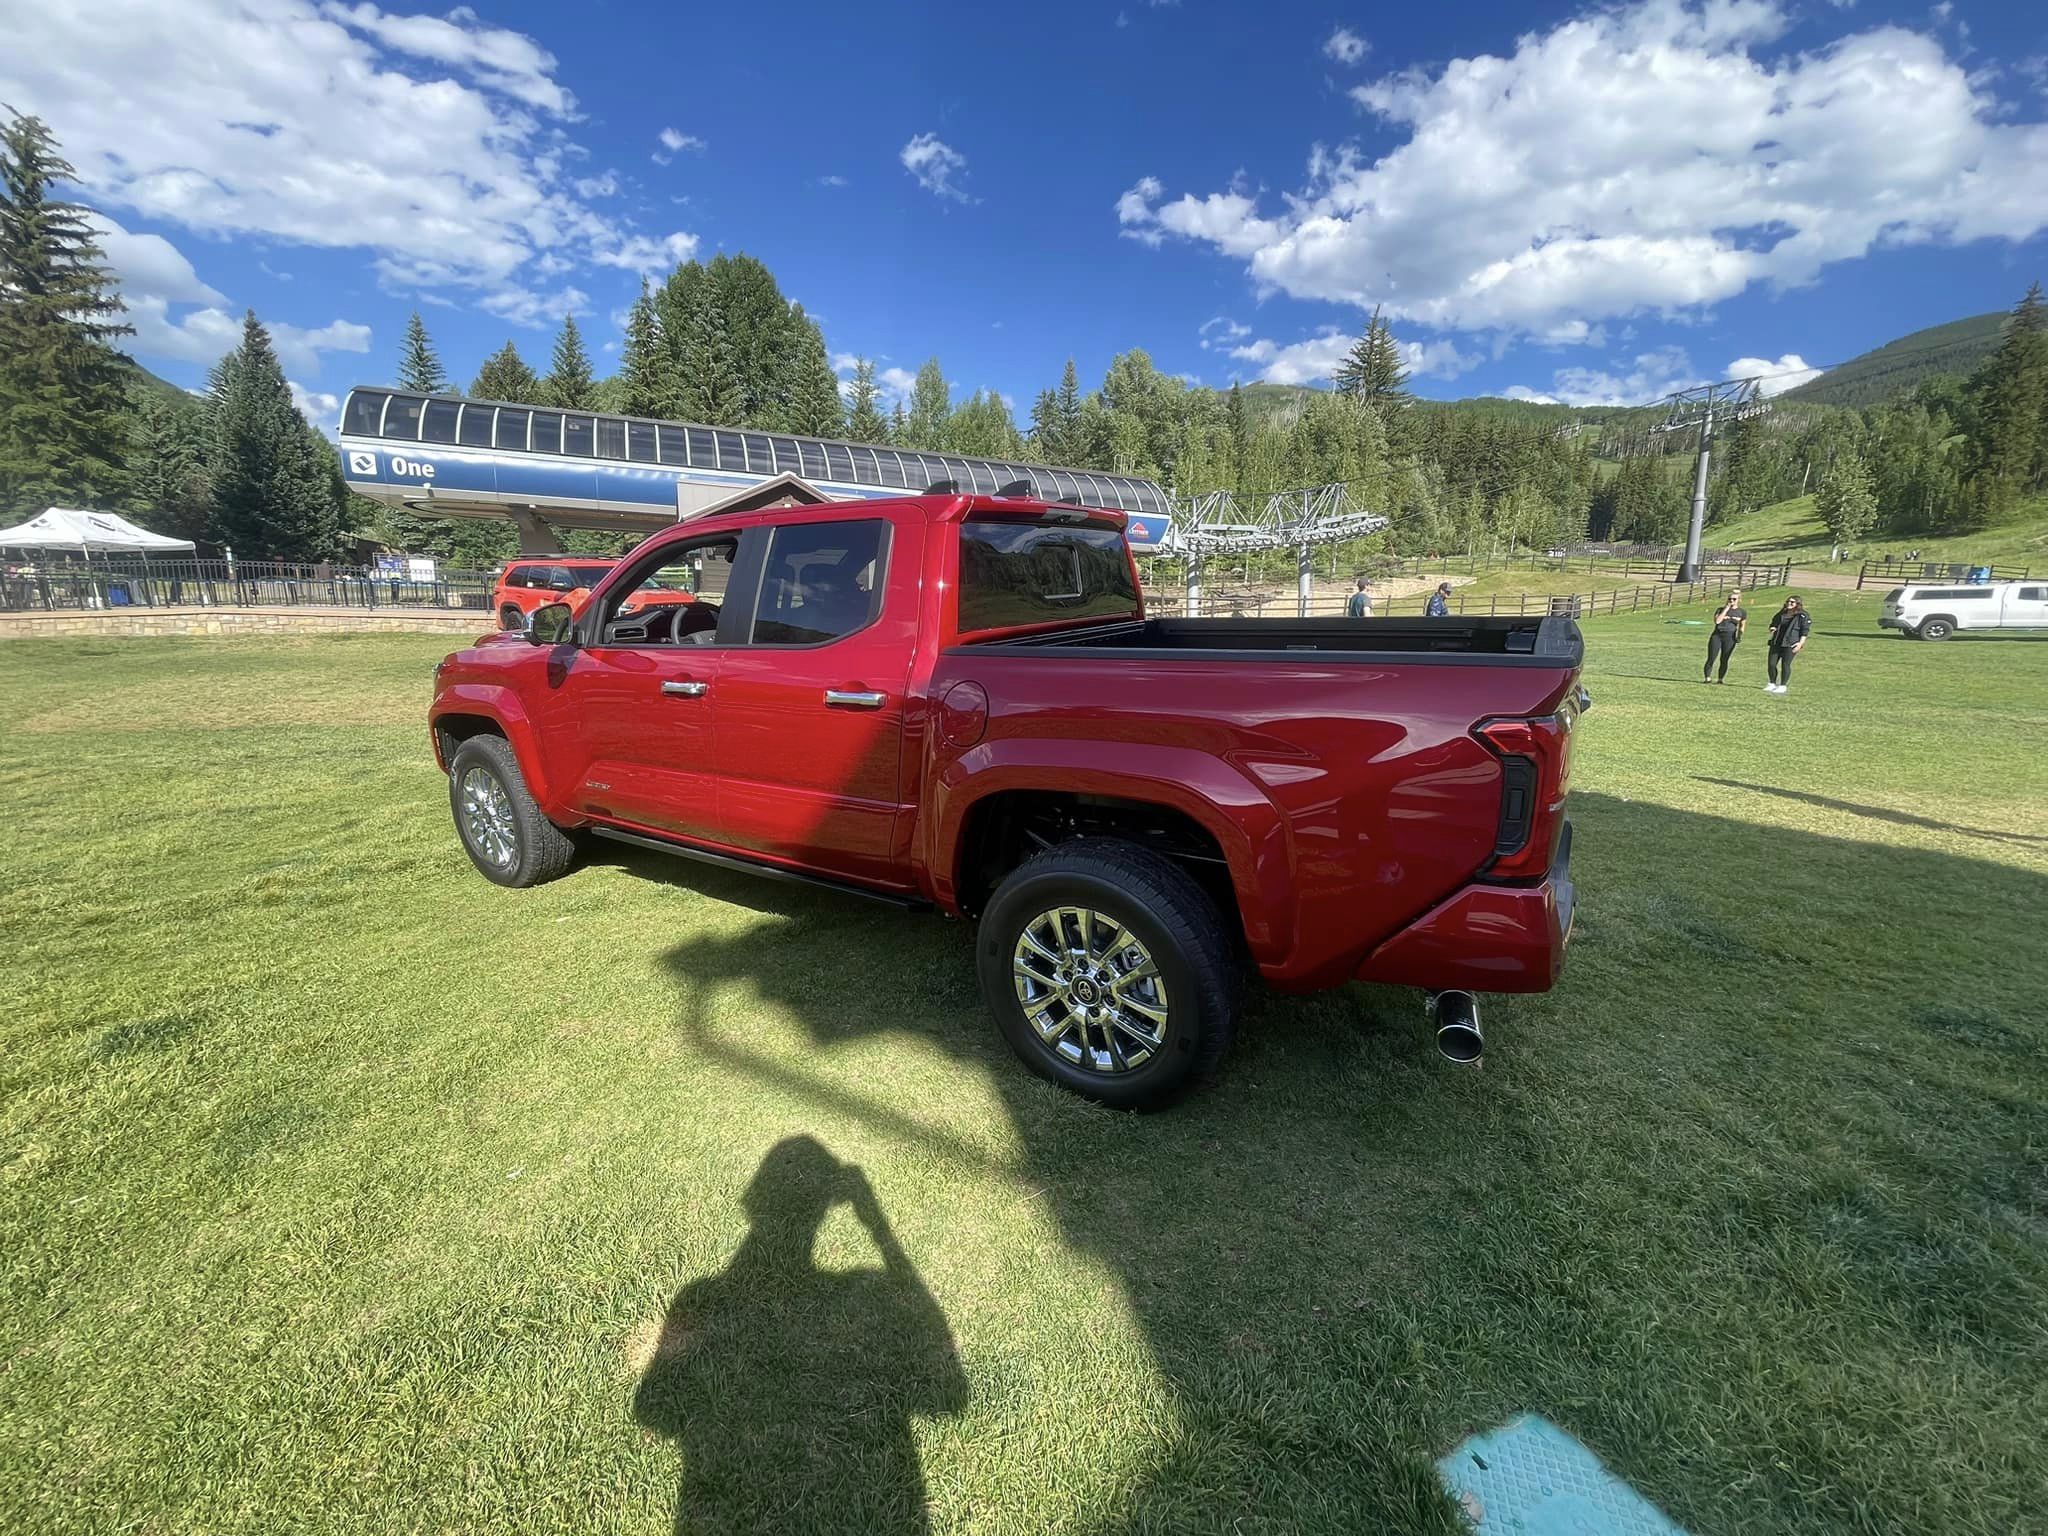 2024 Tacoma 2024 Tacoma Limited in Supersonic Red appears at Toyota Takeover Weekend Vail 2024 Tacoma Limited in Supersonic Red 2